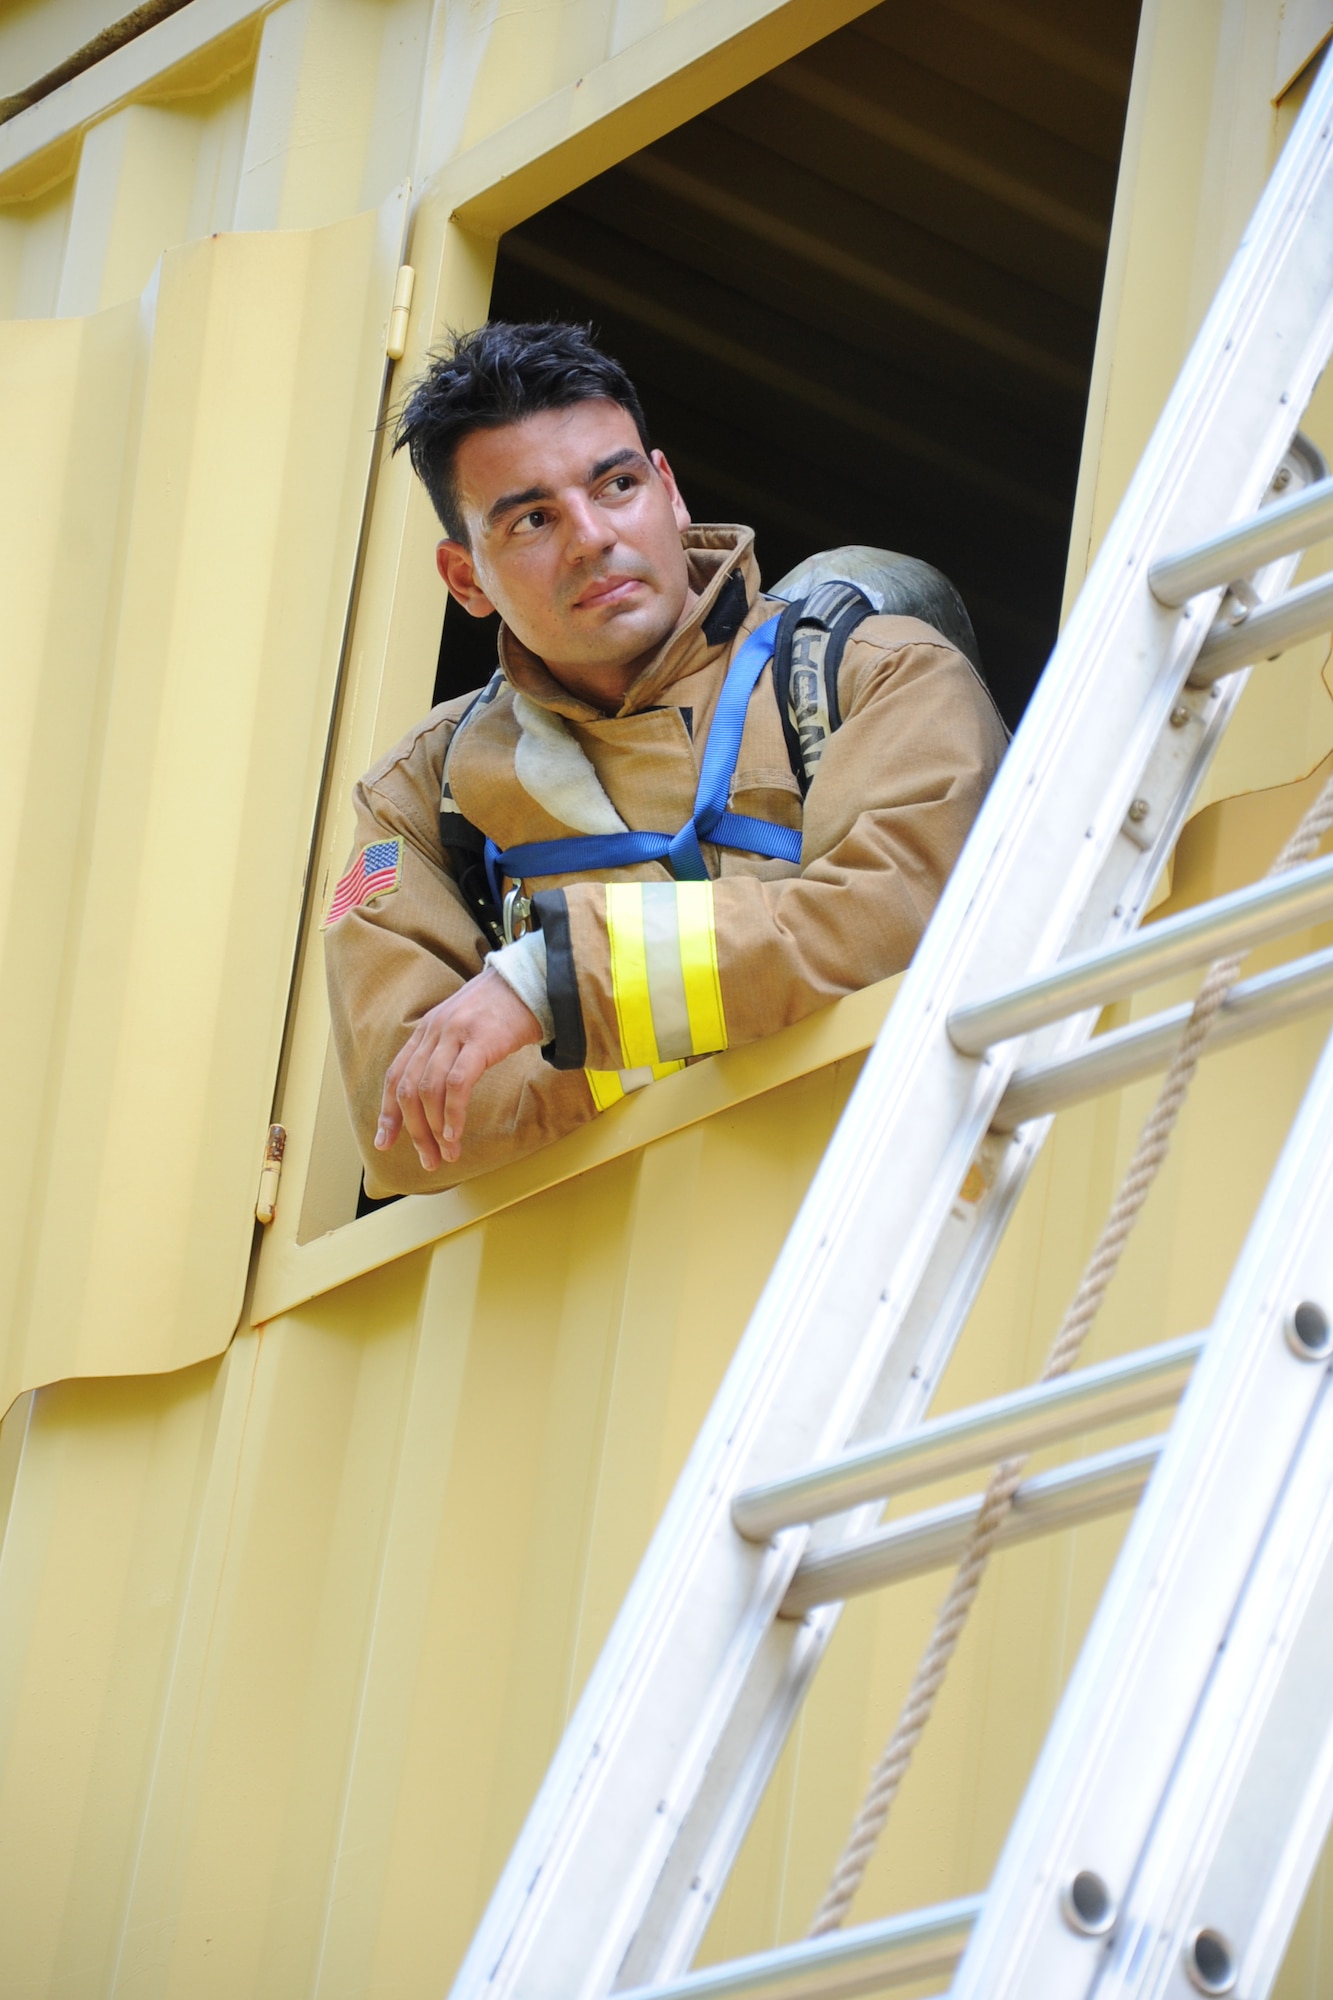 U.S. Air Force Tech. Sgt. Matthew Pires, a Citizen Airmen from the 624th Civil Engineer Squadron, Joint Base Pearl Harbor-Hickam, Hawaii, observes fellow firefighters bailout out of a simulated burning building during the first-ever Air Force Reserve Command Firefighter Rescue and Survival Course at Dobbins Air Reserve Base, Ga., April 18, 2017. Twenty Citizen Airmen participated in the intense 50-hour course held at the 622nd Civil Engineer Group expeditionary combat support-training certification center, which focused on a Rapid Intervention Crew, or RIC. The RIC is a dedicated and specially trained group of firefighters whose responsibilities include safely evacuating a distressed firefighter from a structure. (U.S. Air Force photo by Master Sgt. Theanne K. Herrmann)